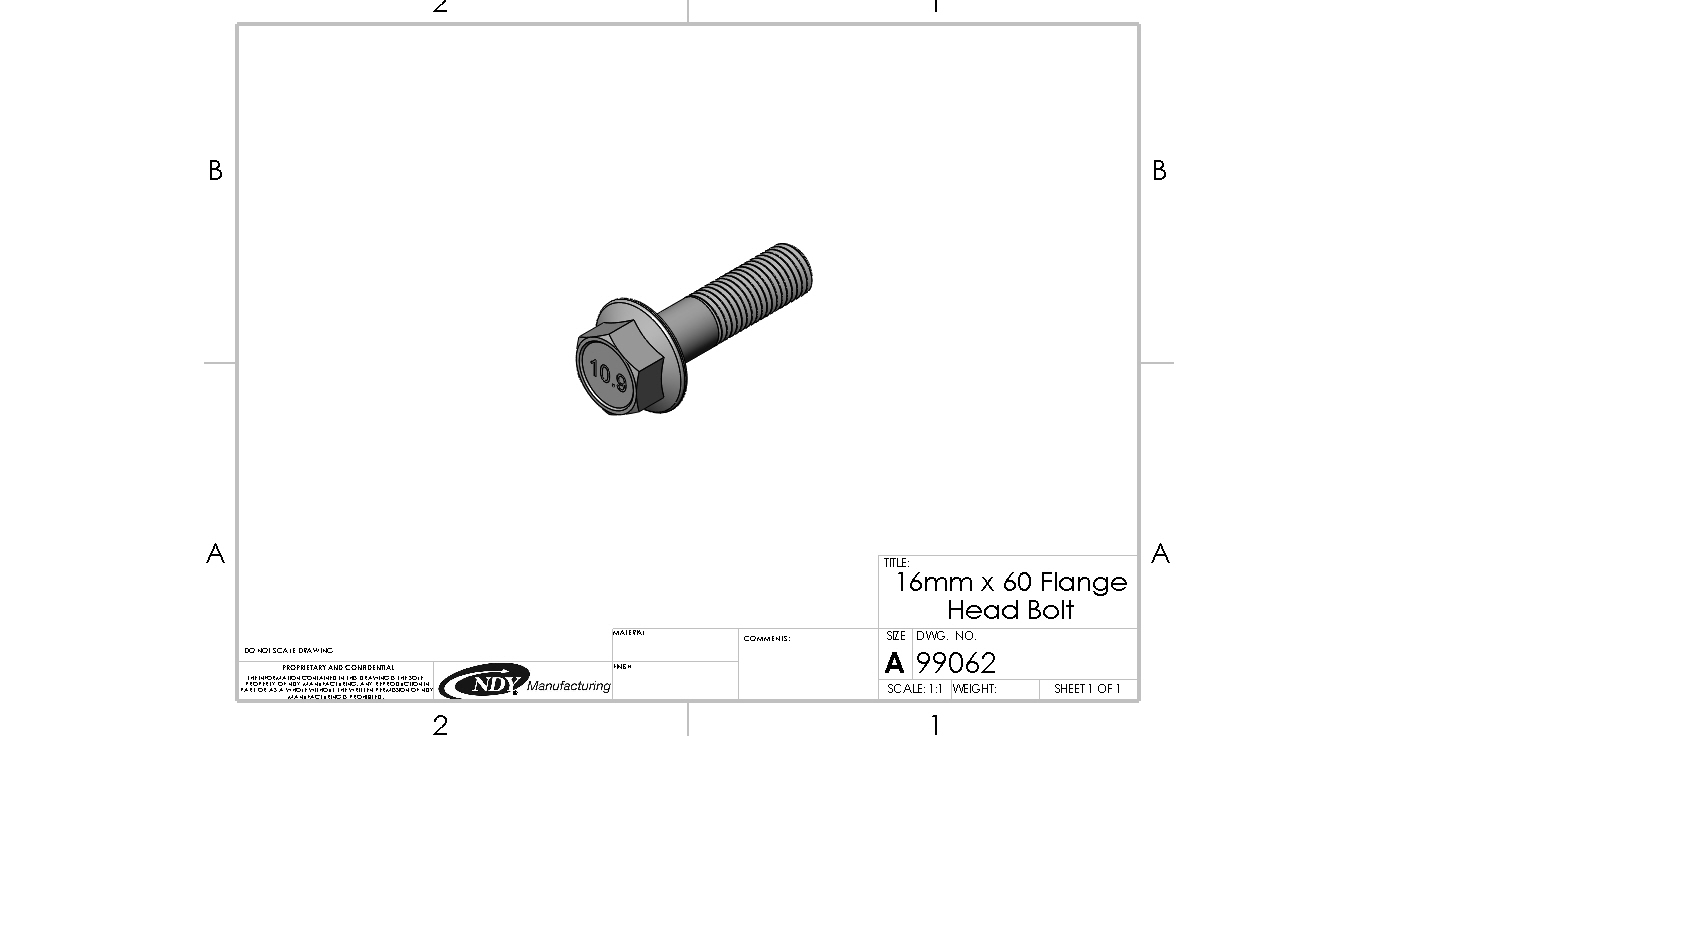 A drawing of a 16MM x 60 Flange Head Bolt with a hole in it.